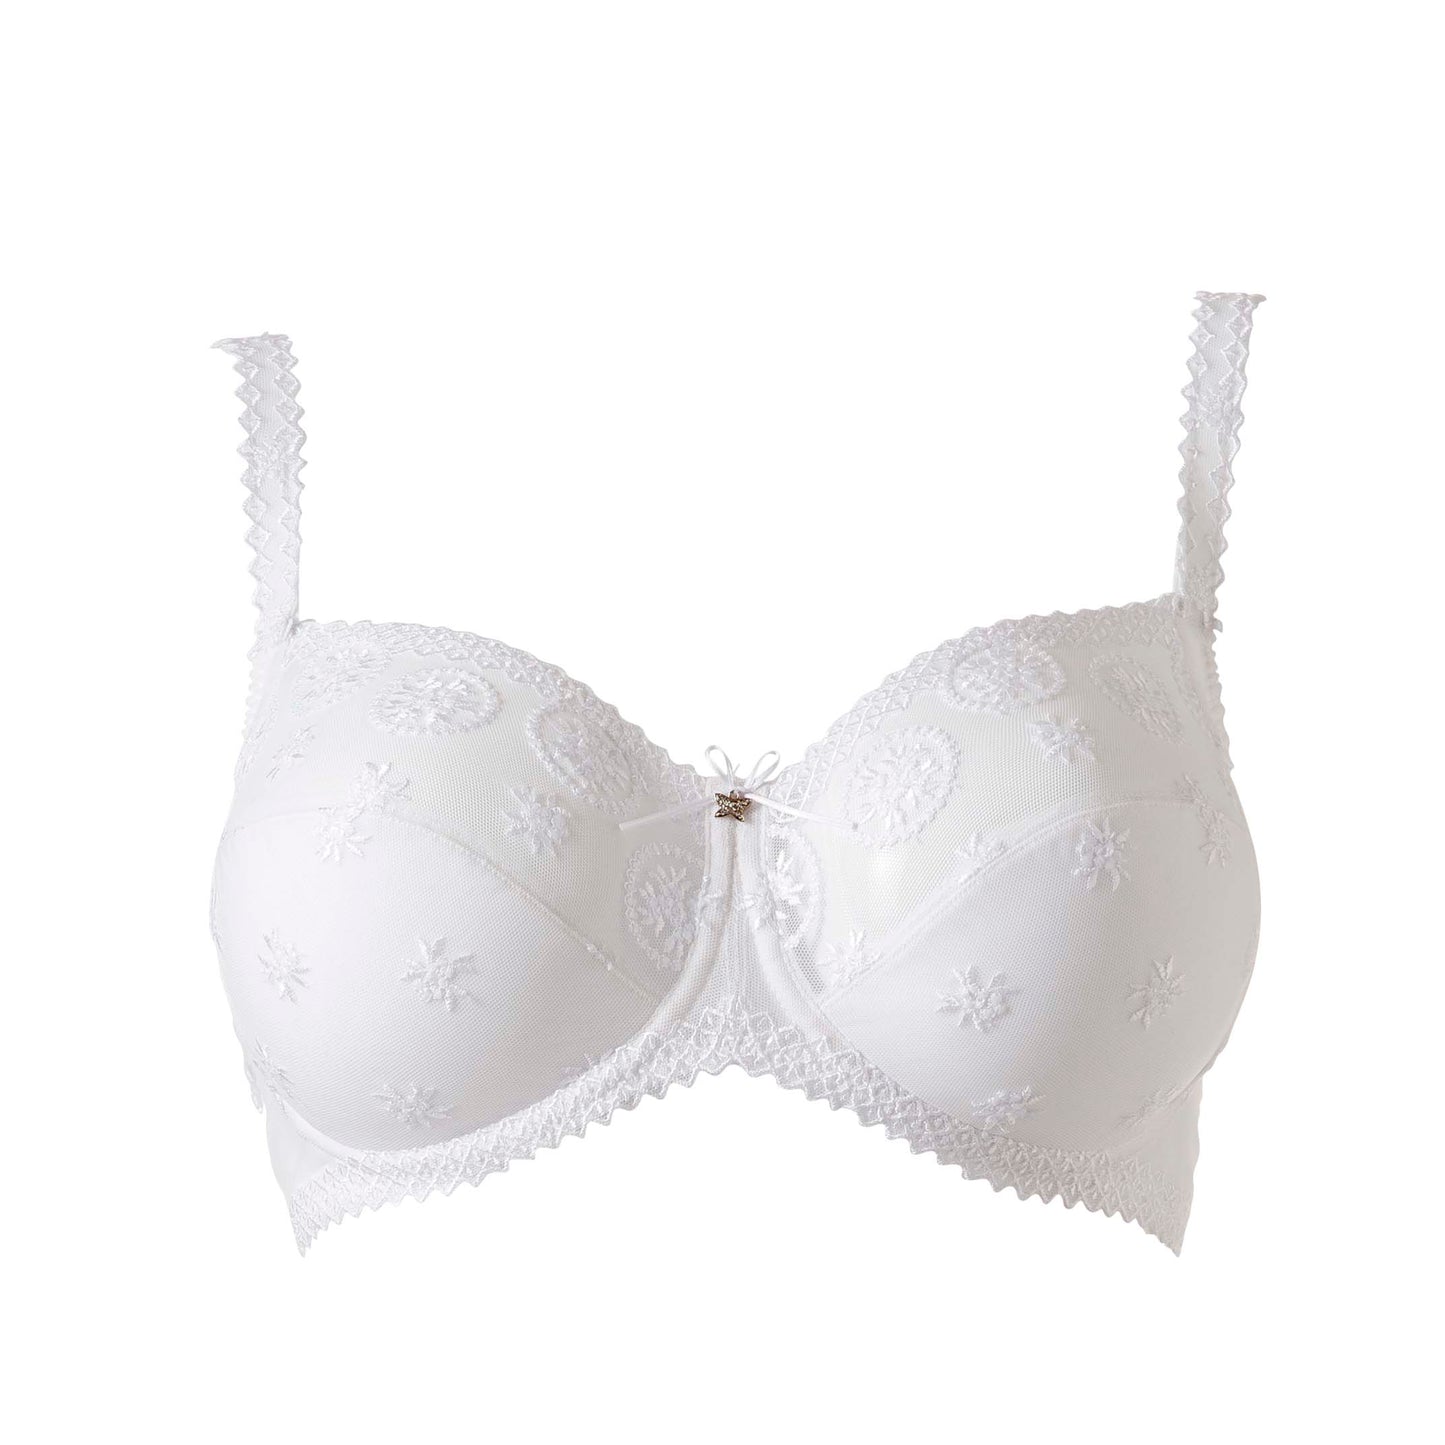 The full cup Louisa Bracq bra from the Chantilly line is distinguished by its chic, refined geometric edges that emphasizes the iridescent medallions.